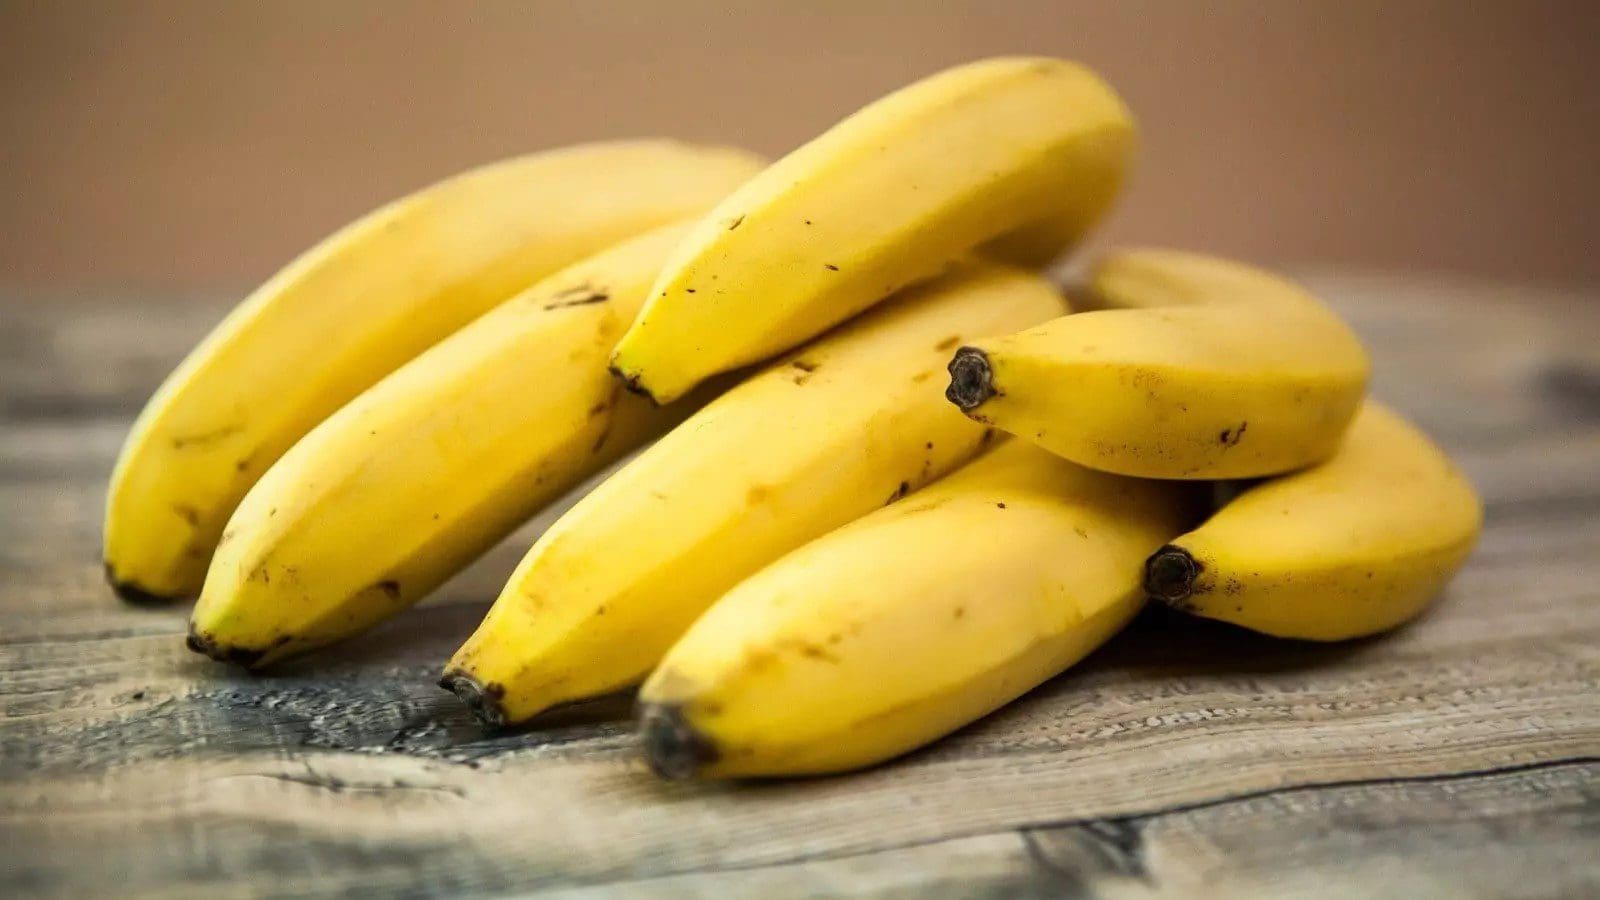 Cameroon attains 12% rise in banana export volumes in March to 22,604 tons